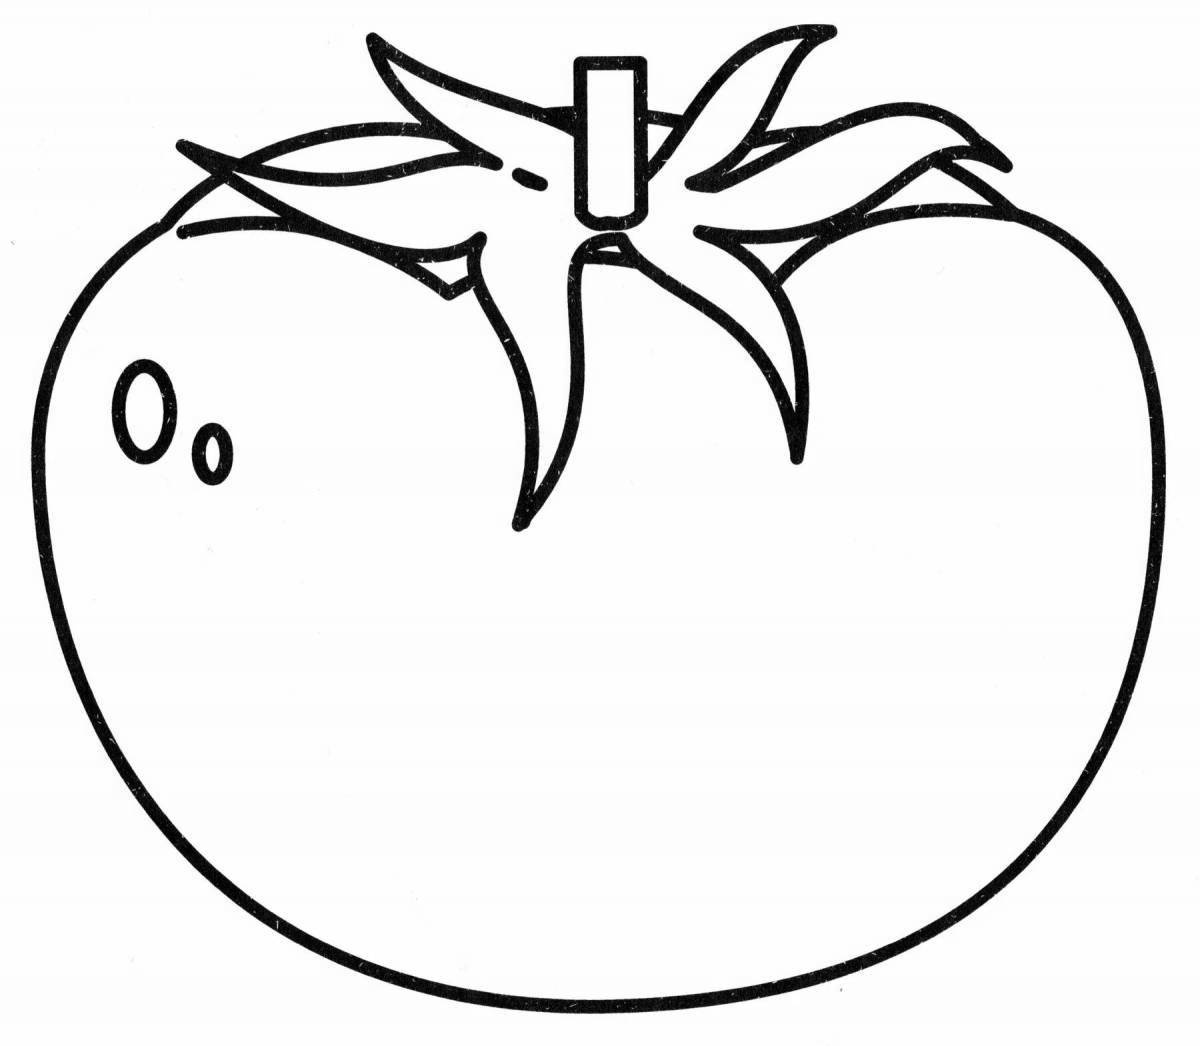 Innovative tomato coloring book for 3-4 year olds